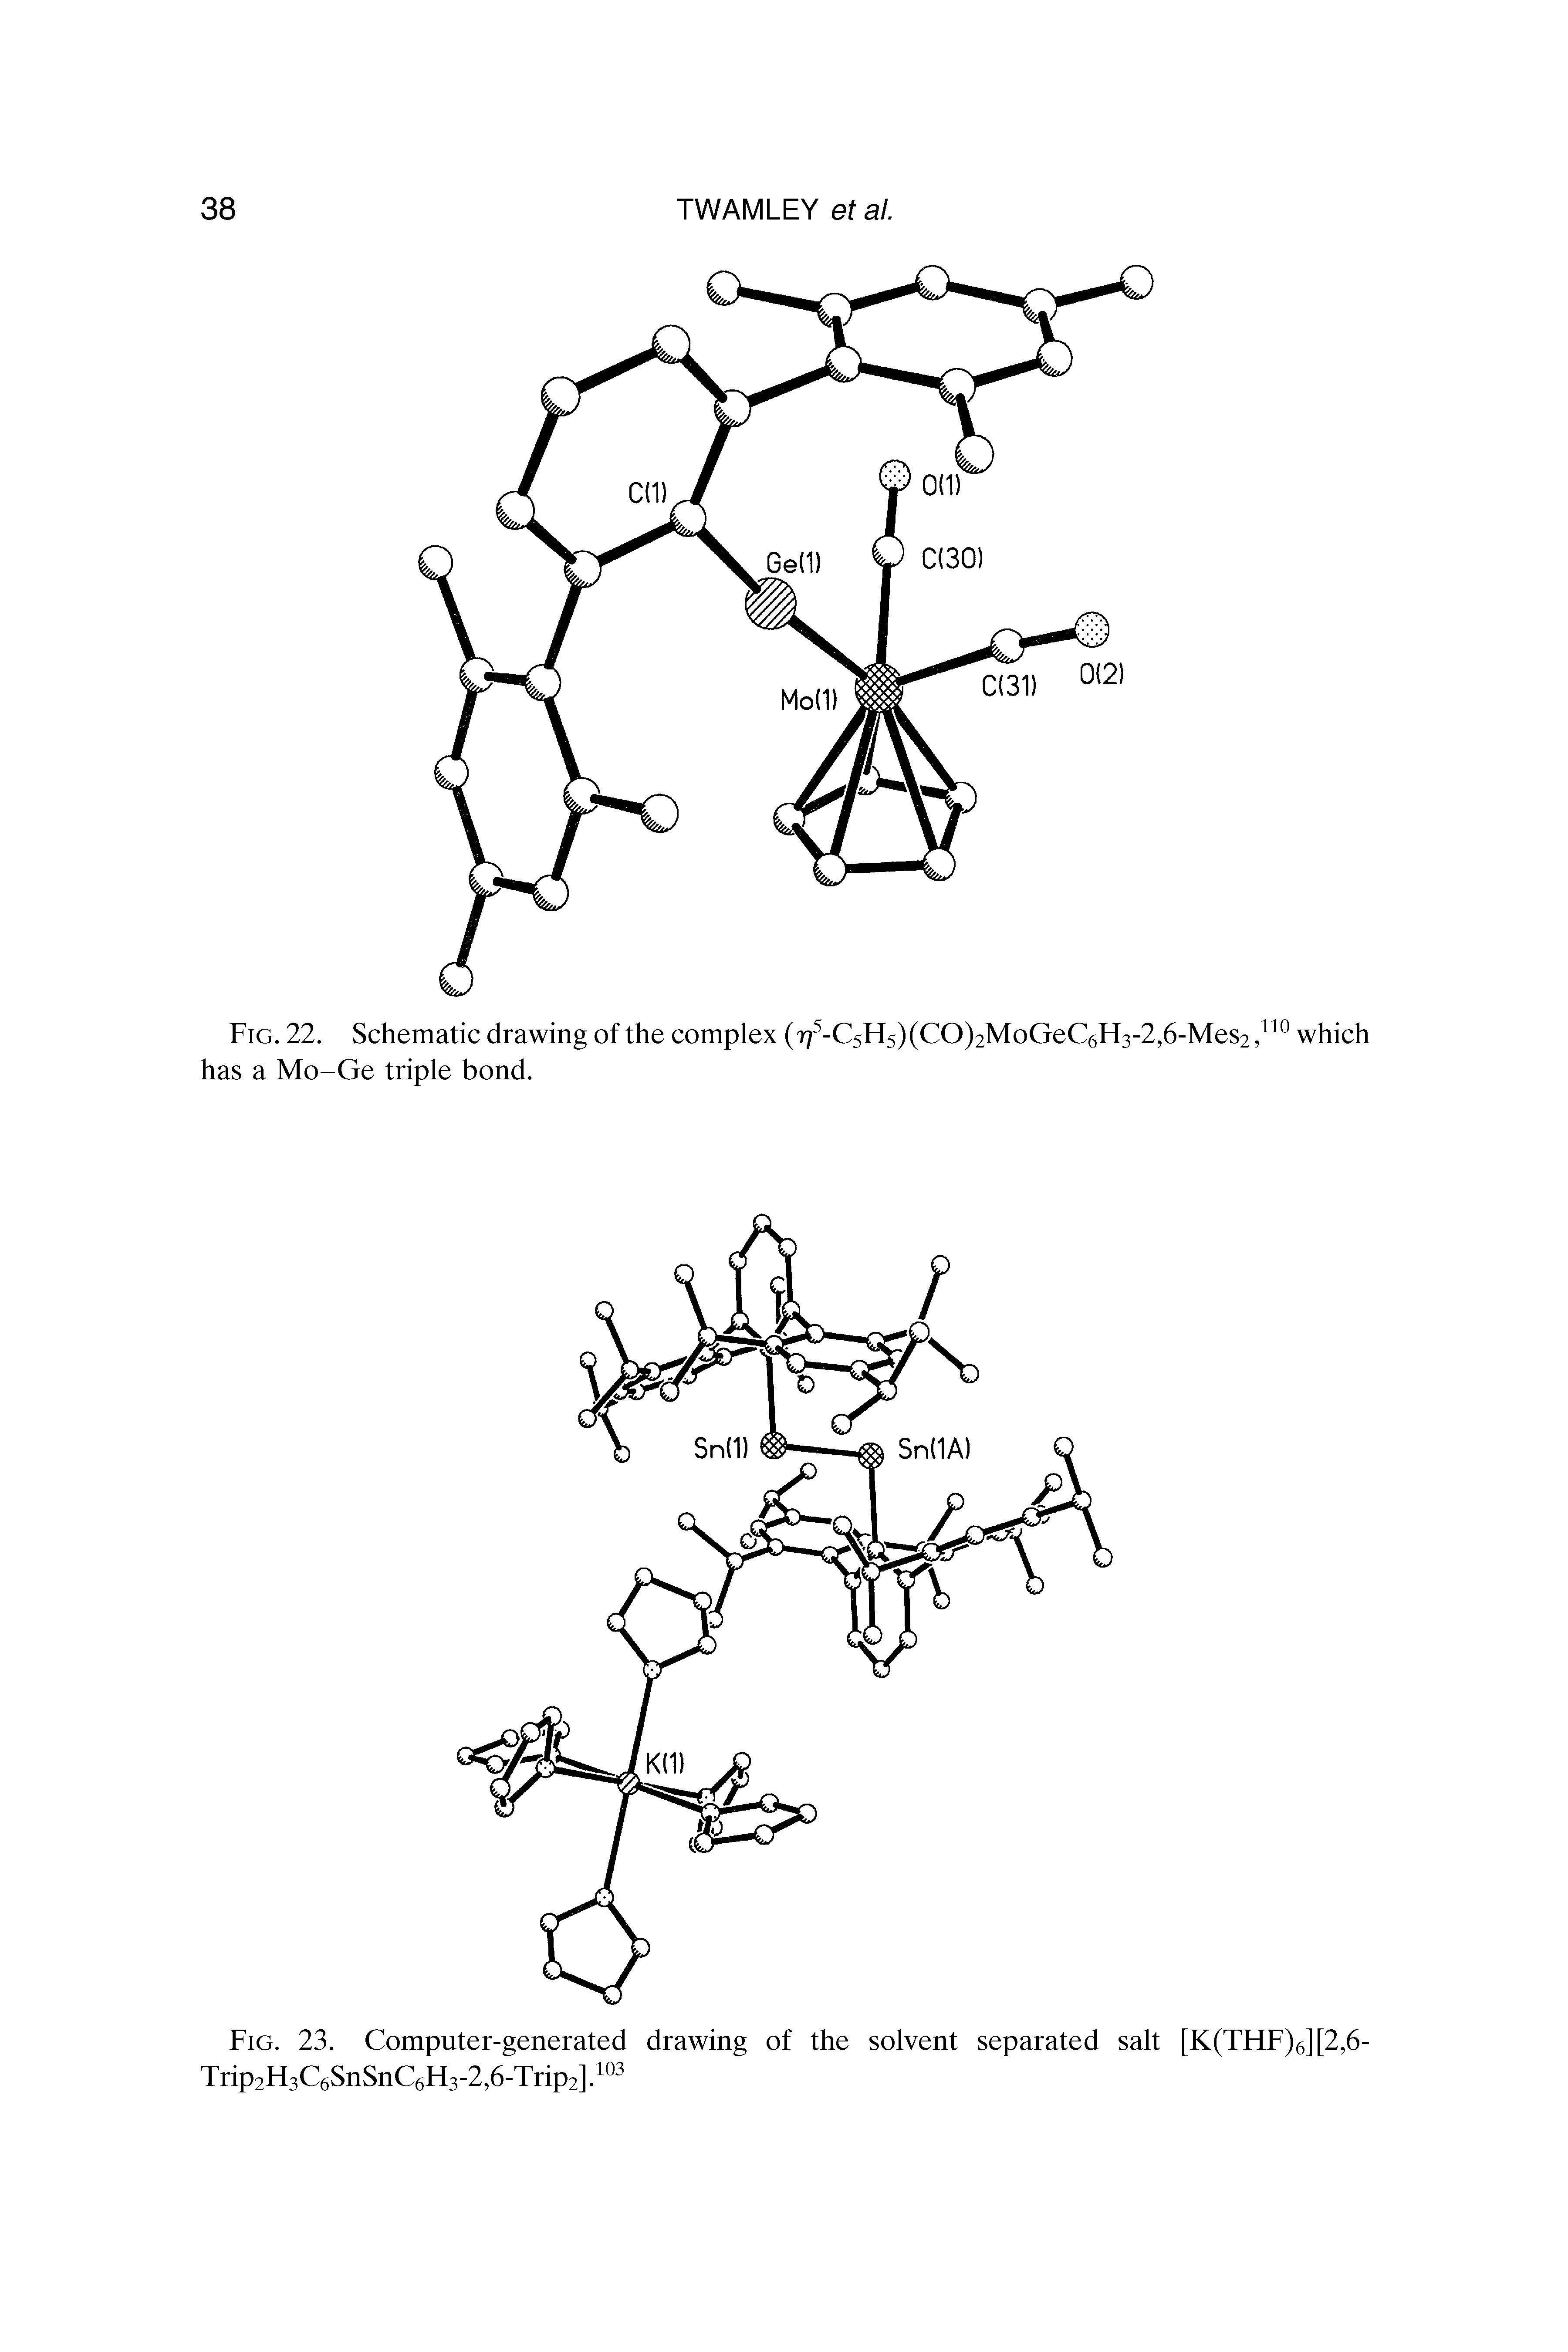 Fig. 23. Computer-generated drawing of the solvent separated salt [K(THF)6][2,6-Trip2H3C6SnSnC6H3-2,6-Trip2].103...